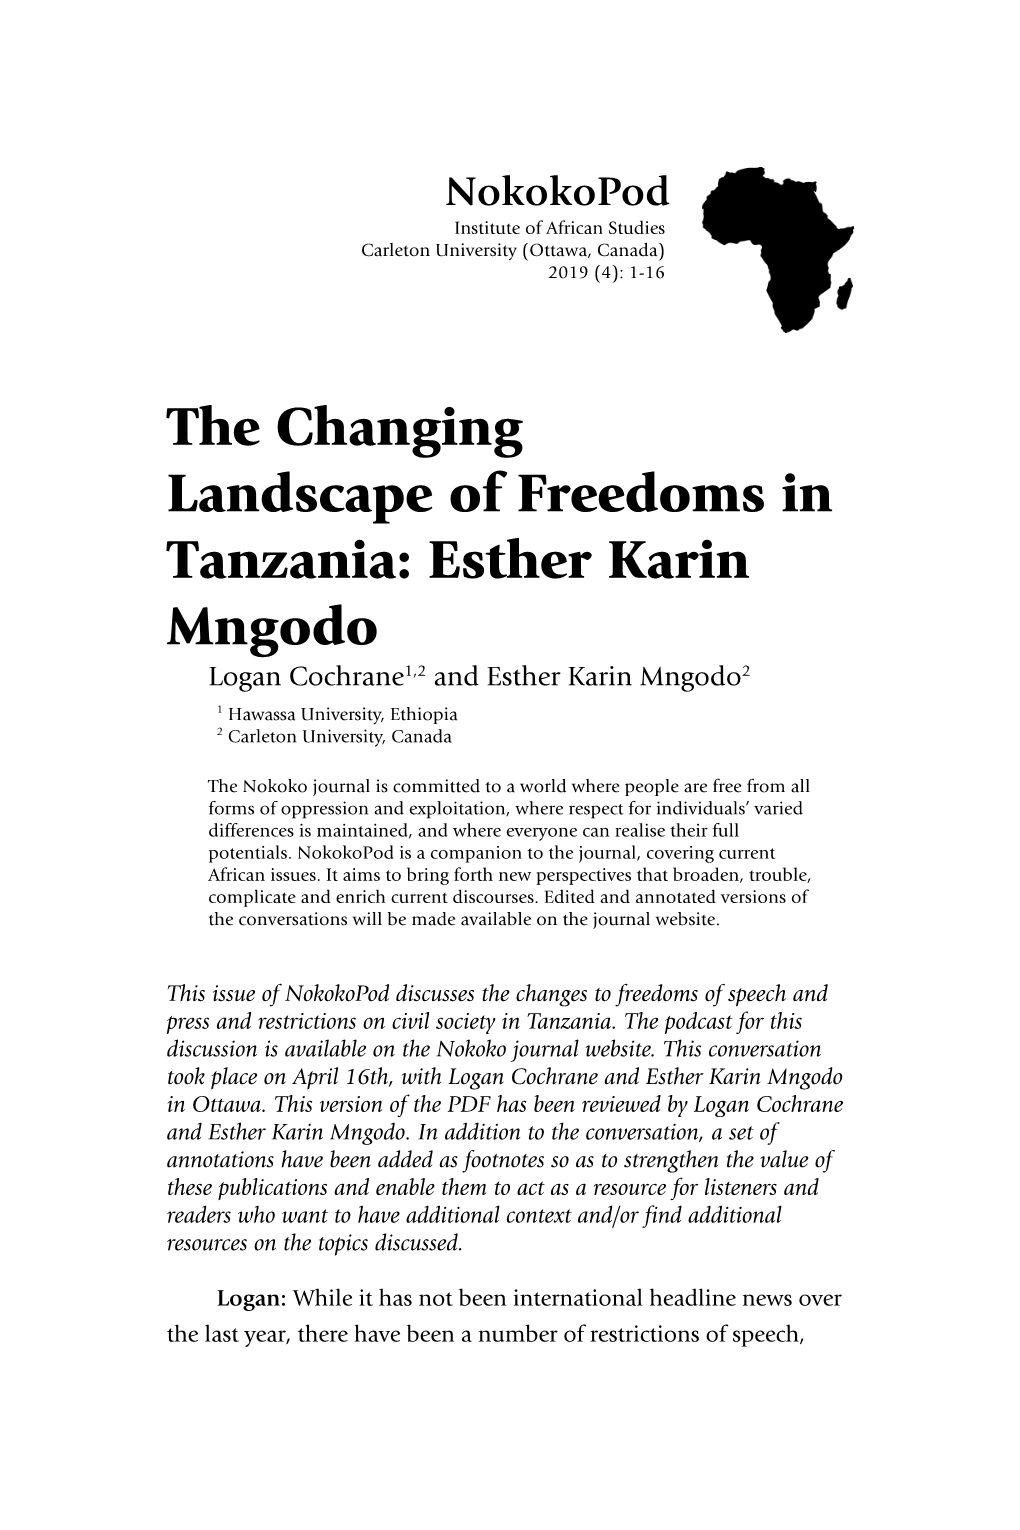 The Changing Landscape of Freedoms in Tanzania: Esther Karin